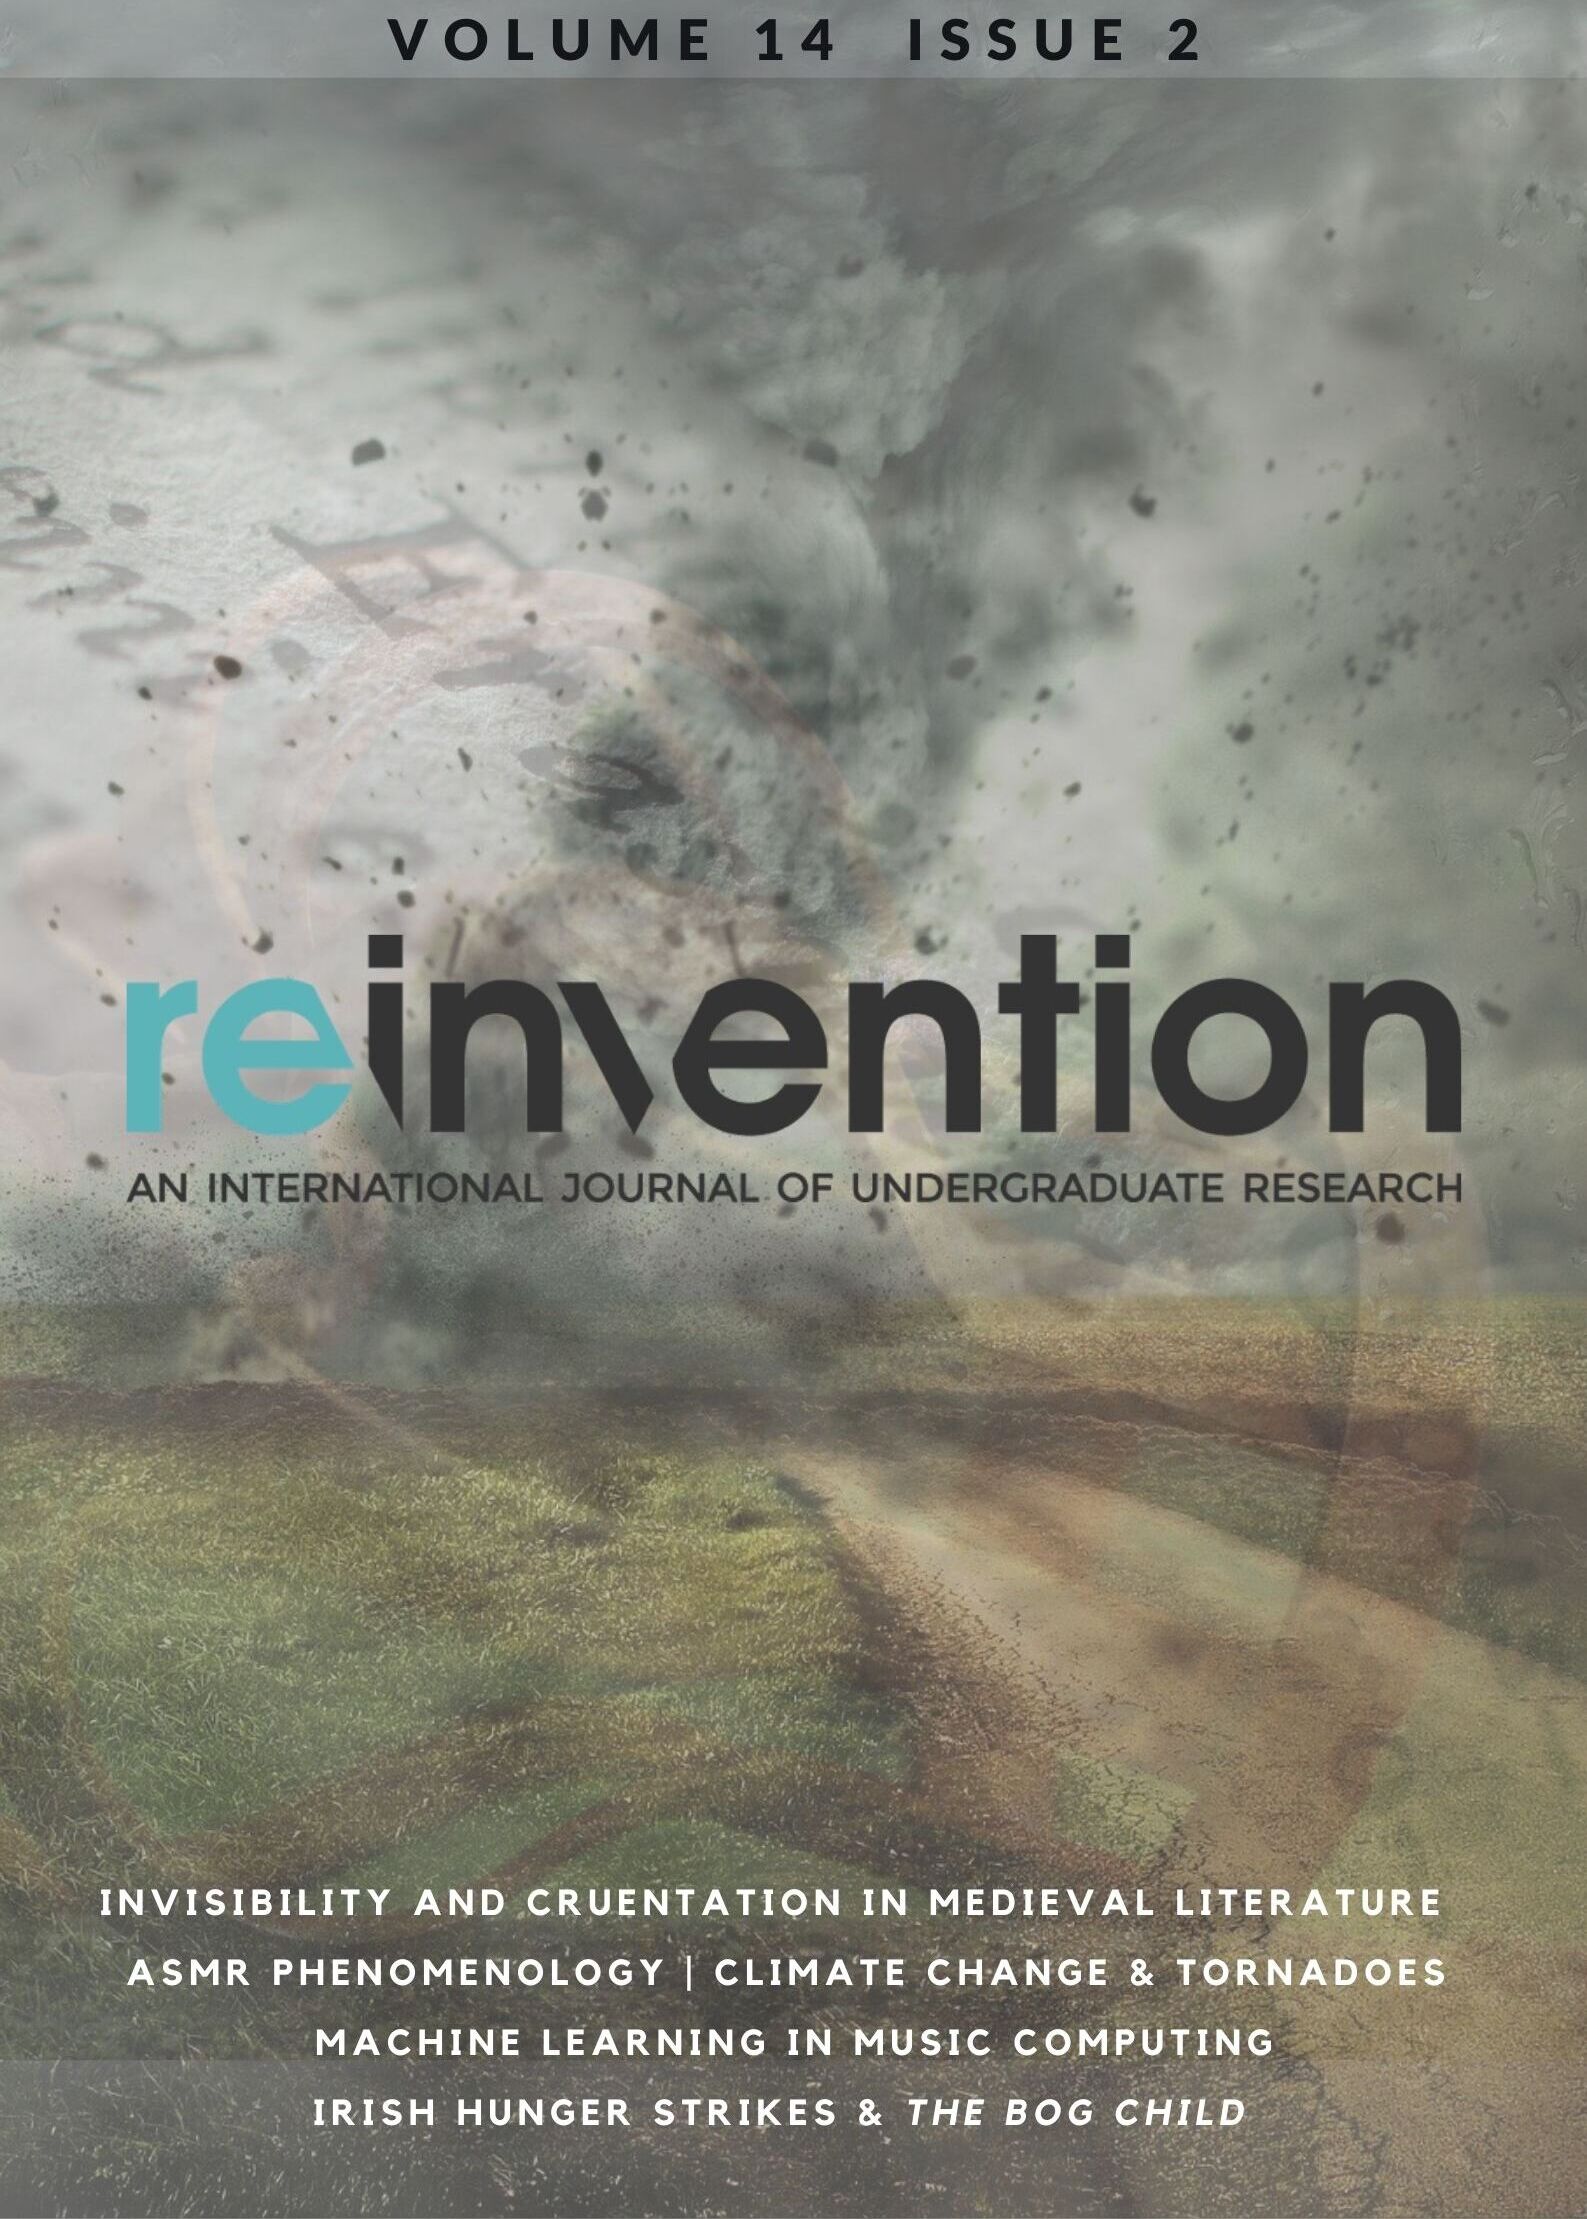 Reinvention Volume 14 Issue 2 Cover